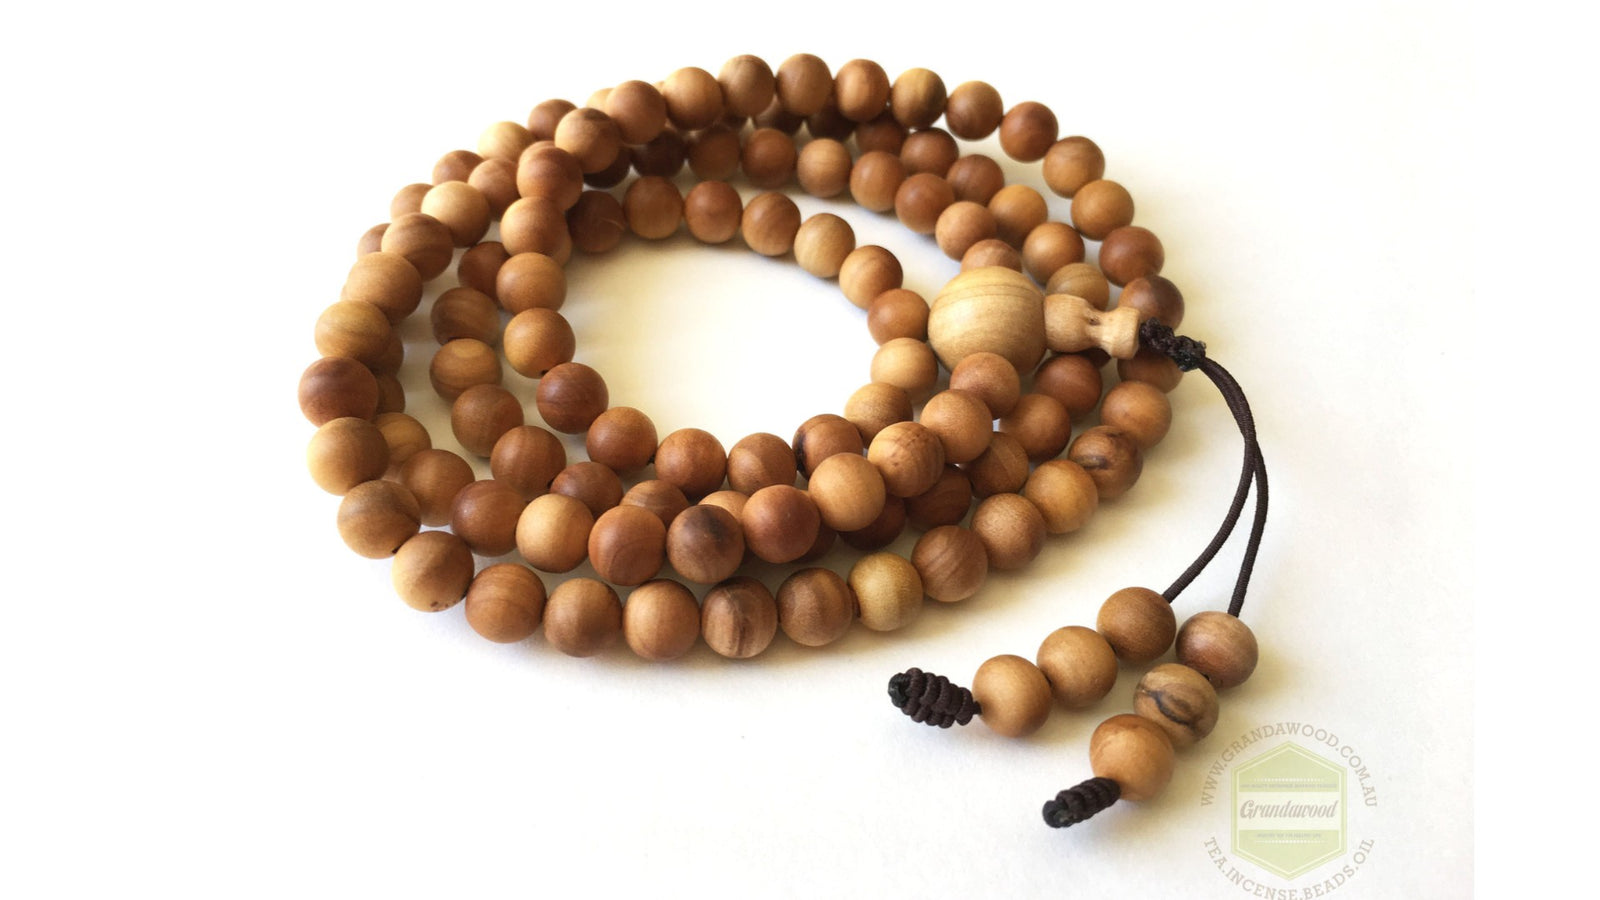 "The Ageless mala " - Wild Aged Sandalwood Mala 108 beads 6mm and/or 8mm